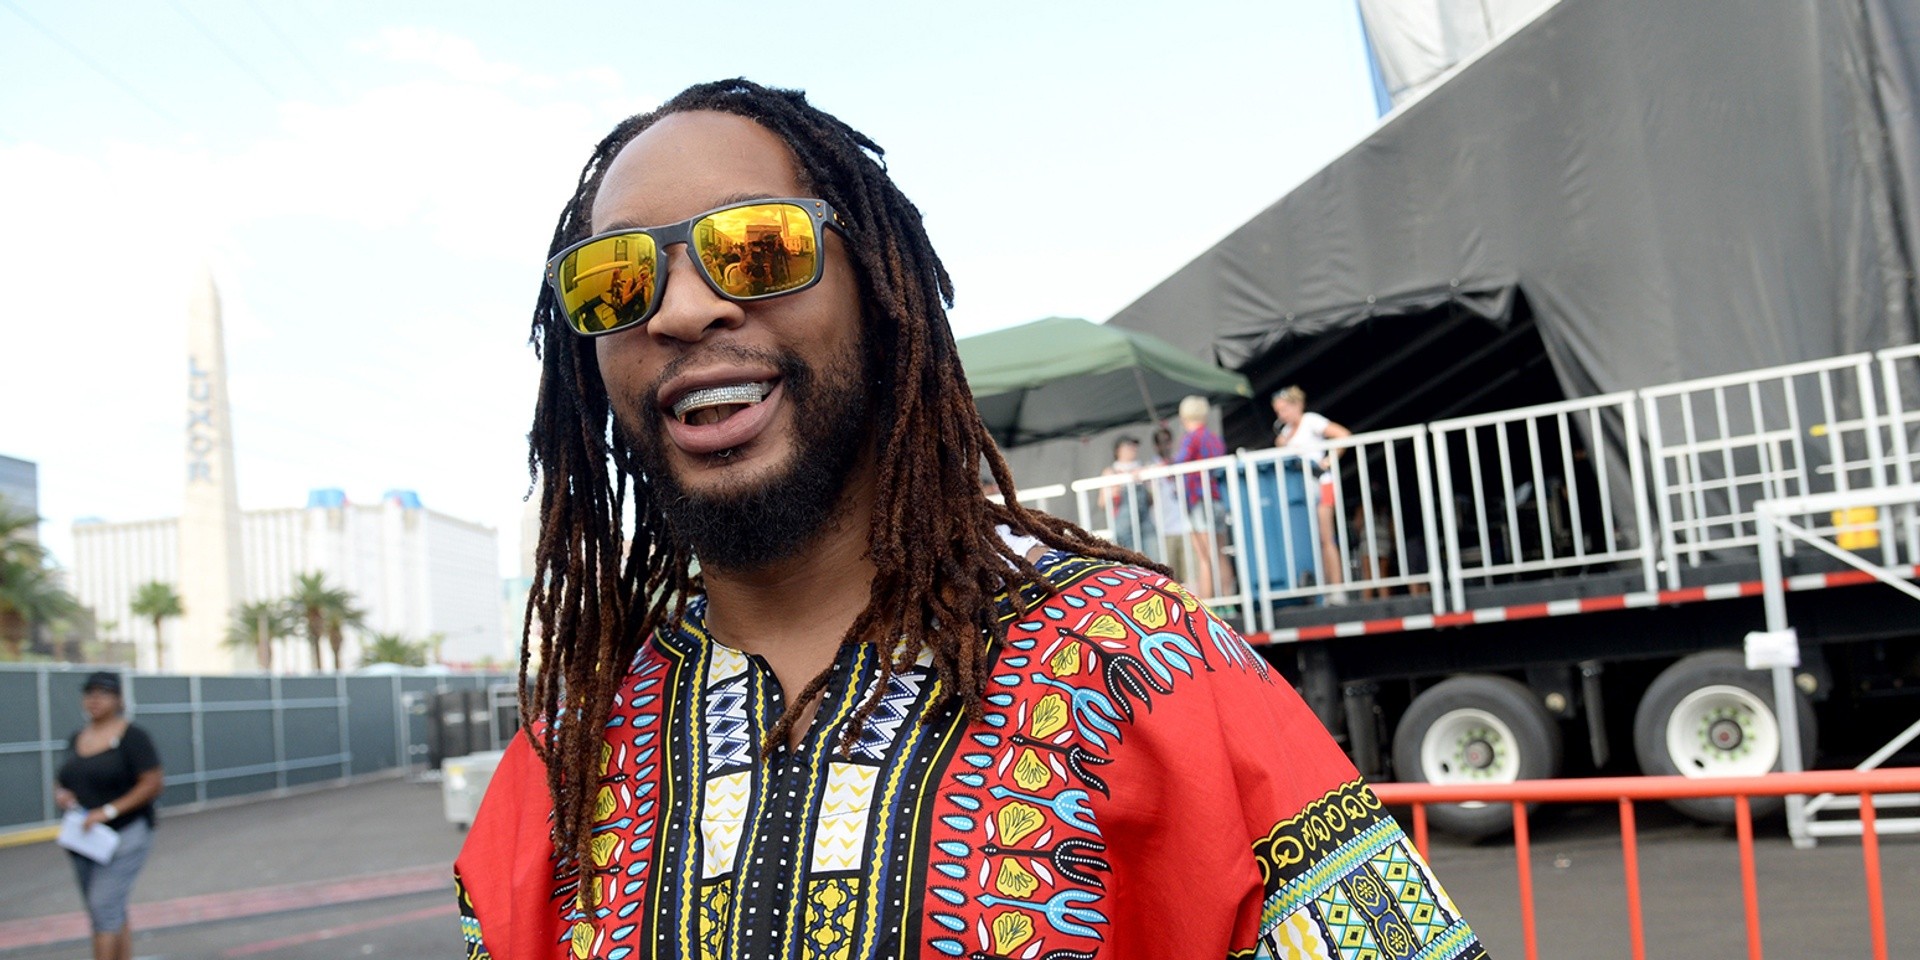 Lil Jon to play Marquee Singapore in August